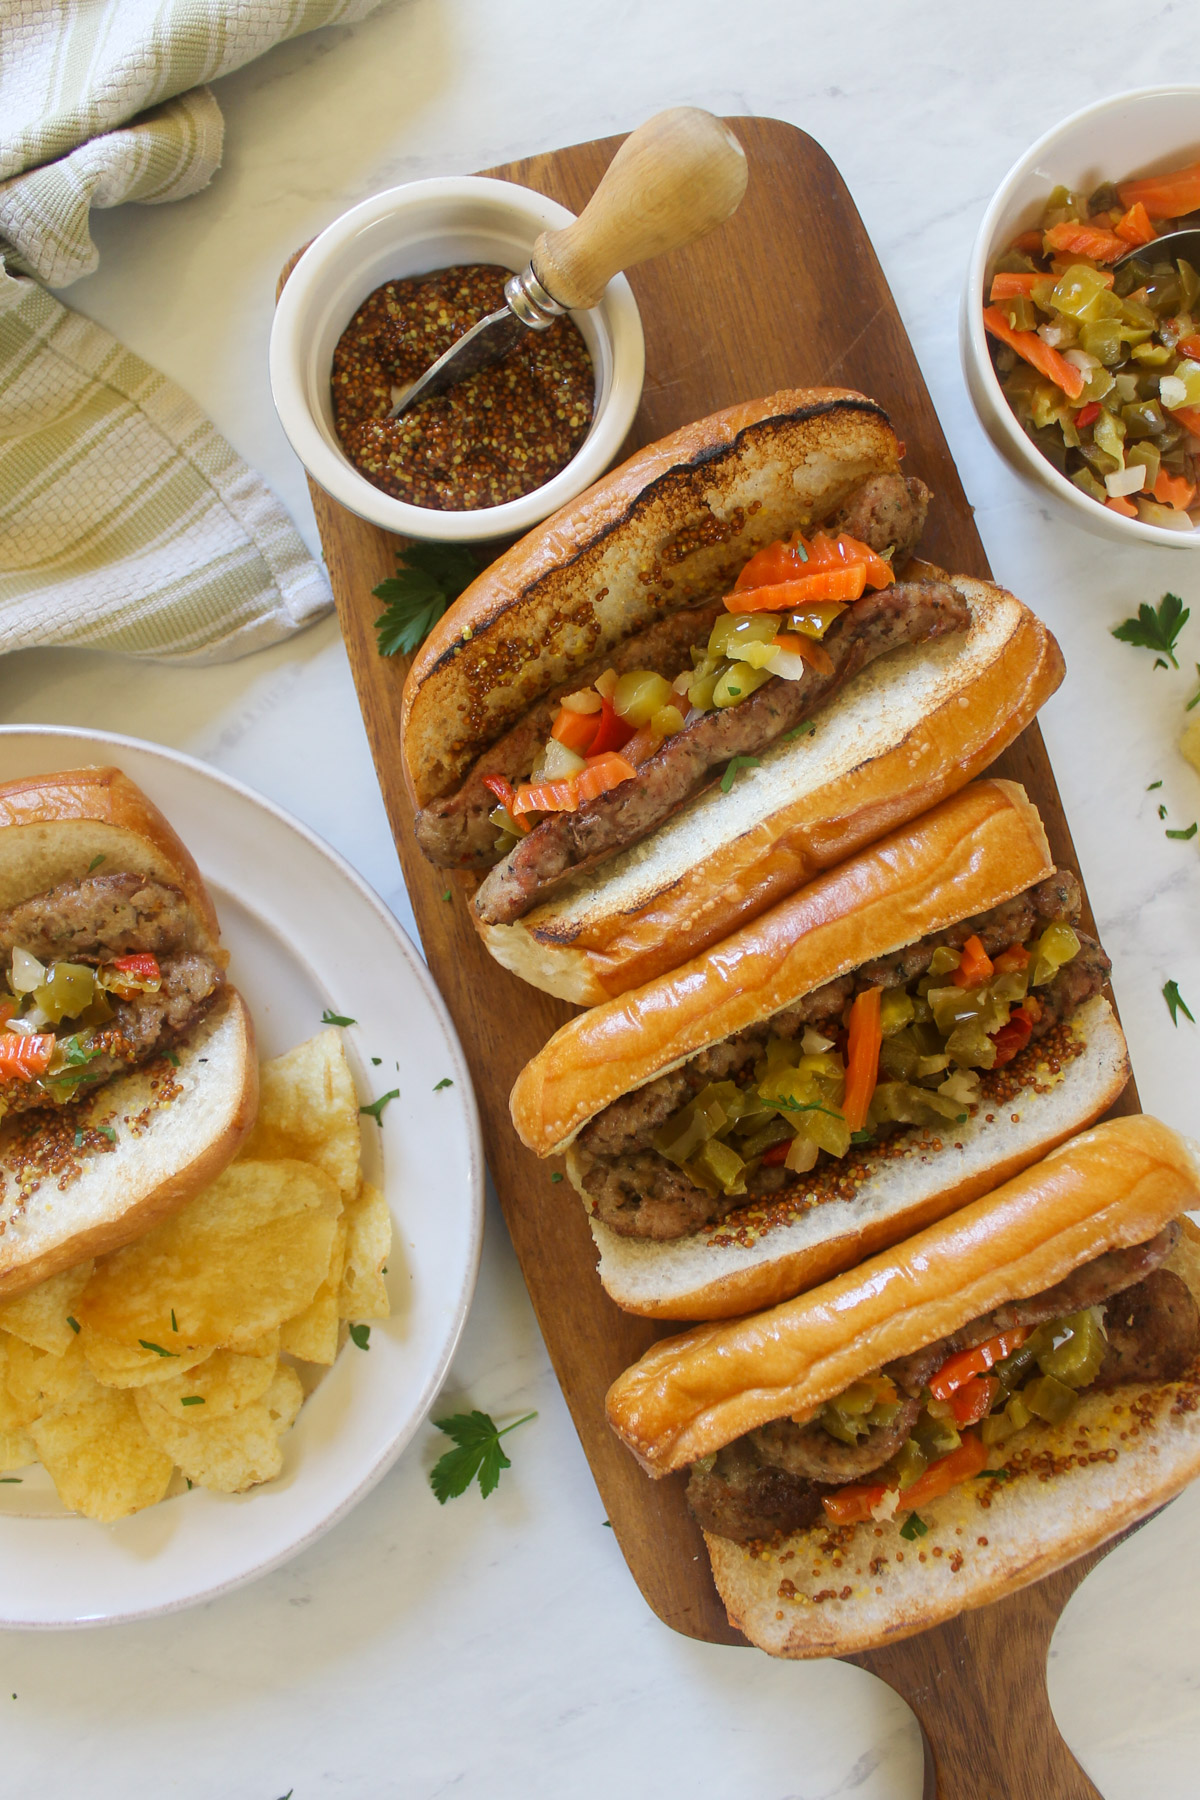 A wooden platter with 3 grilled Italian sausages in buns topped with giardiniera and a small bowl of grainy dijon mustard.